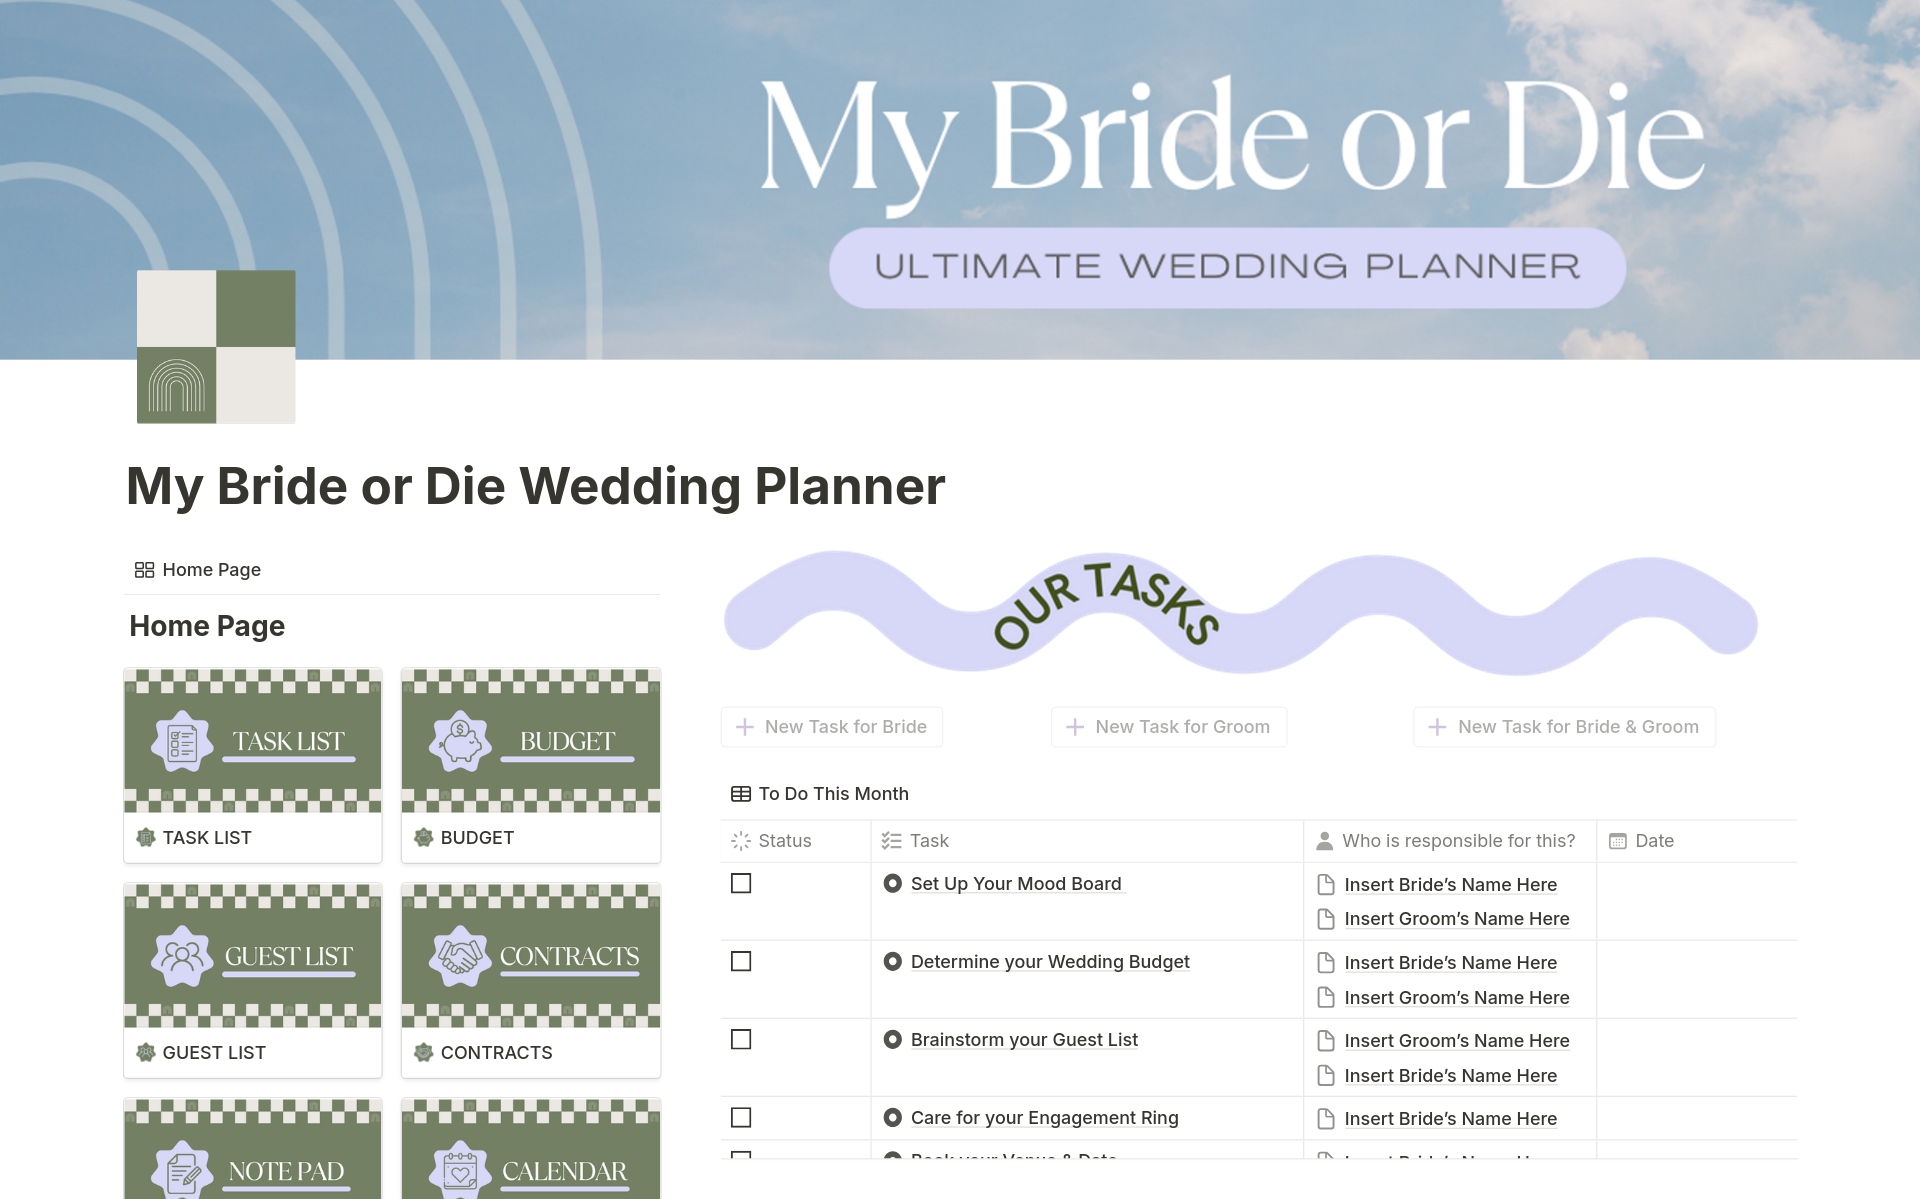 Dreaming of a seamless wedding planning experience? Our all-in-one Notion Wedding Planner has you covered with to-do lists, guest management and RSVP tracking, contract storage, mood boards, and tons of customization options. Save time, reduce stress, and plan your dream wedding!